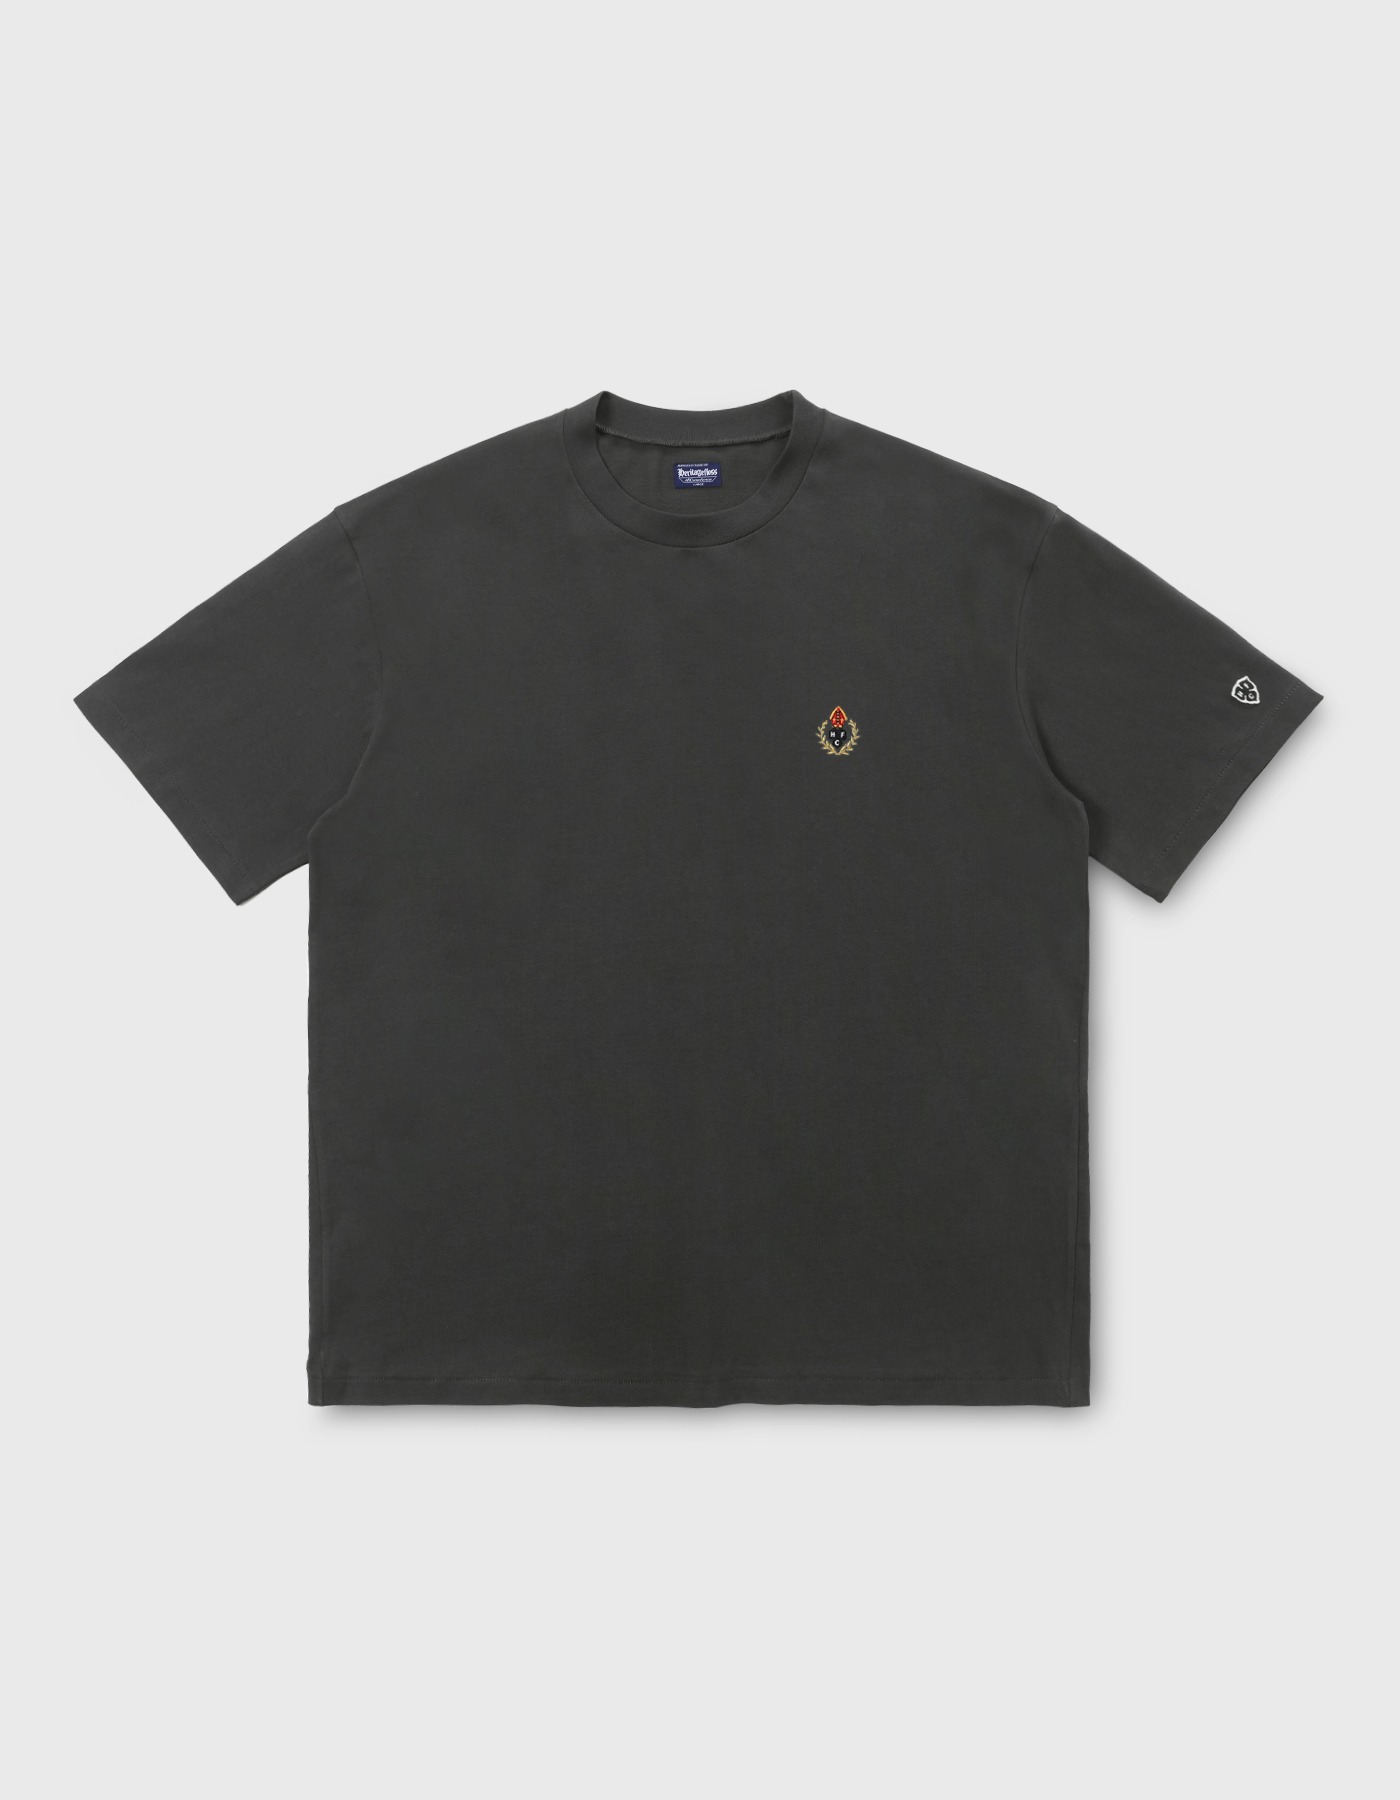 CREST 20S COMPACT YARN T-SHIRT / Charcoal